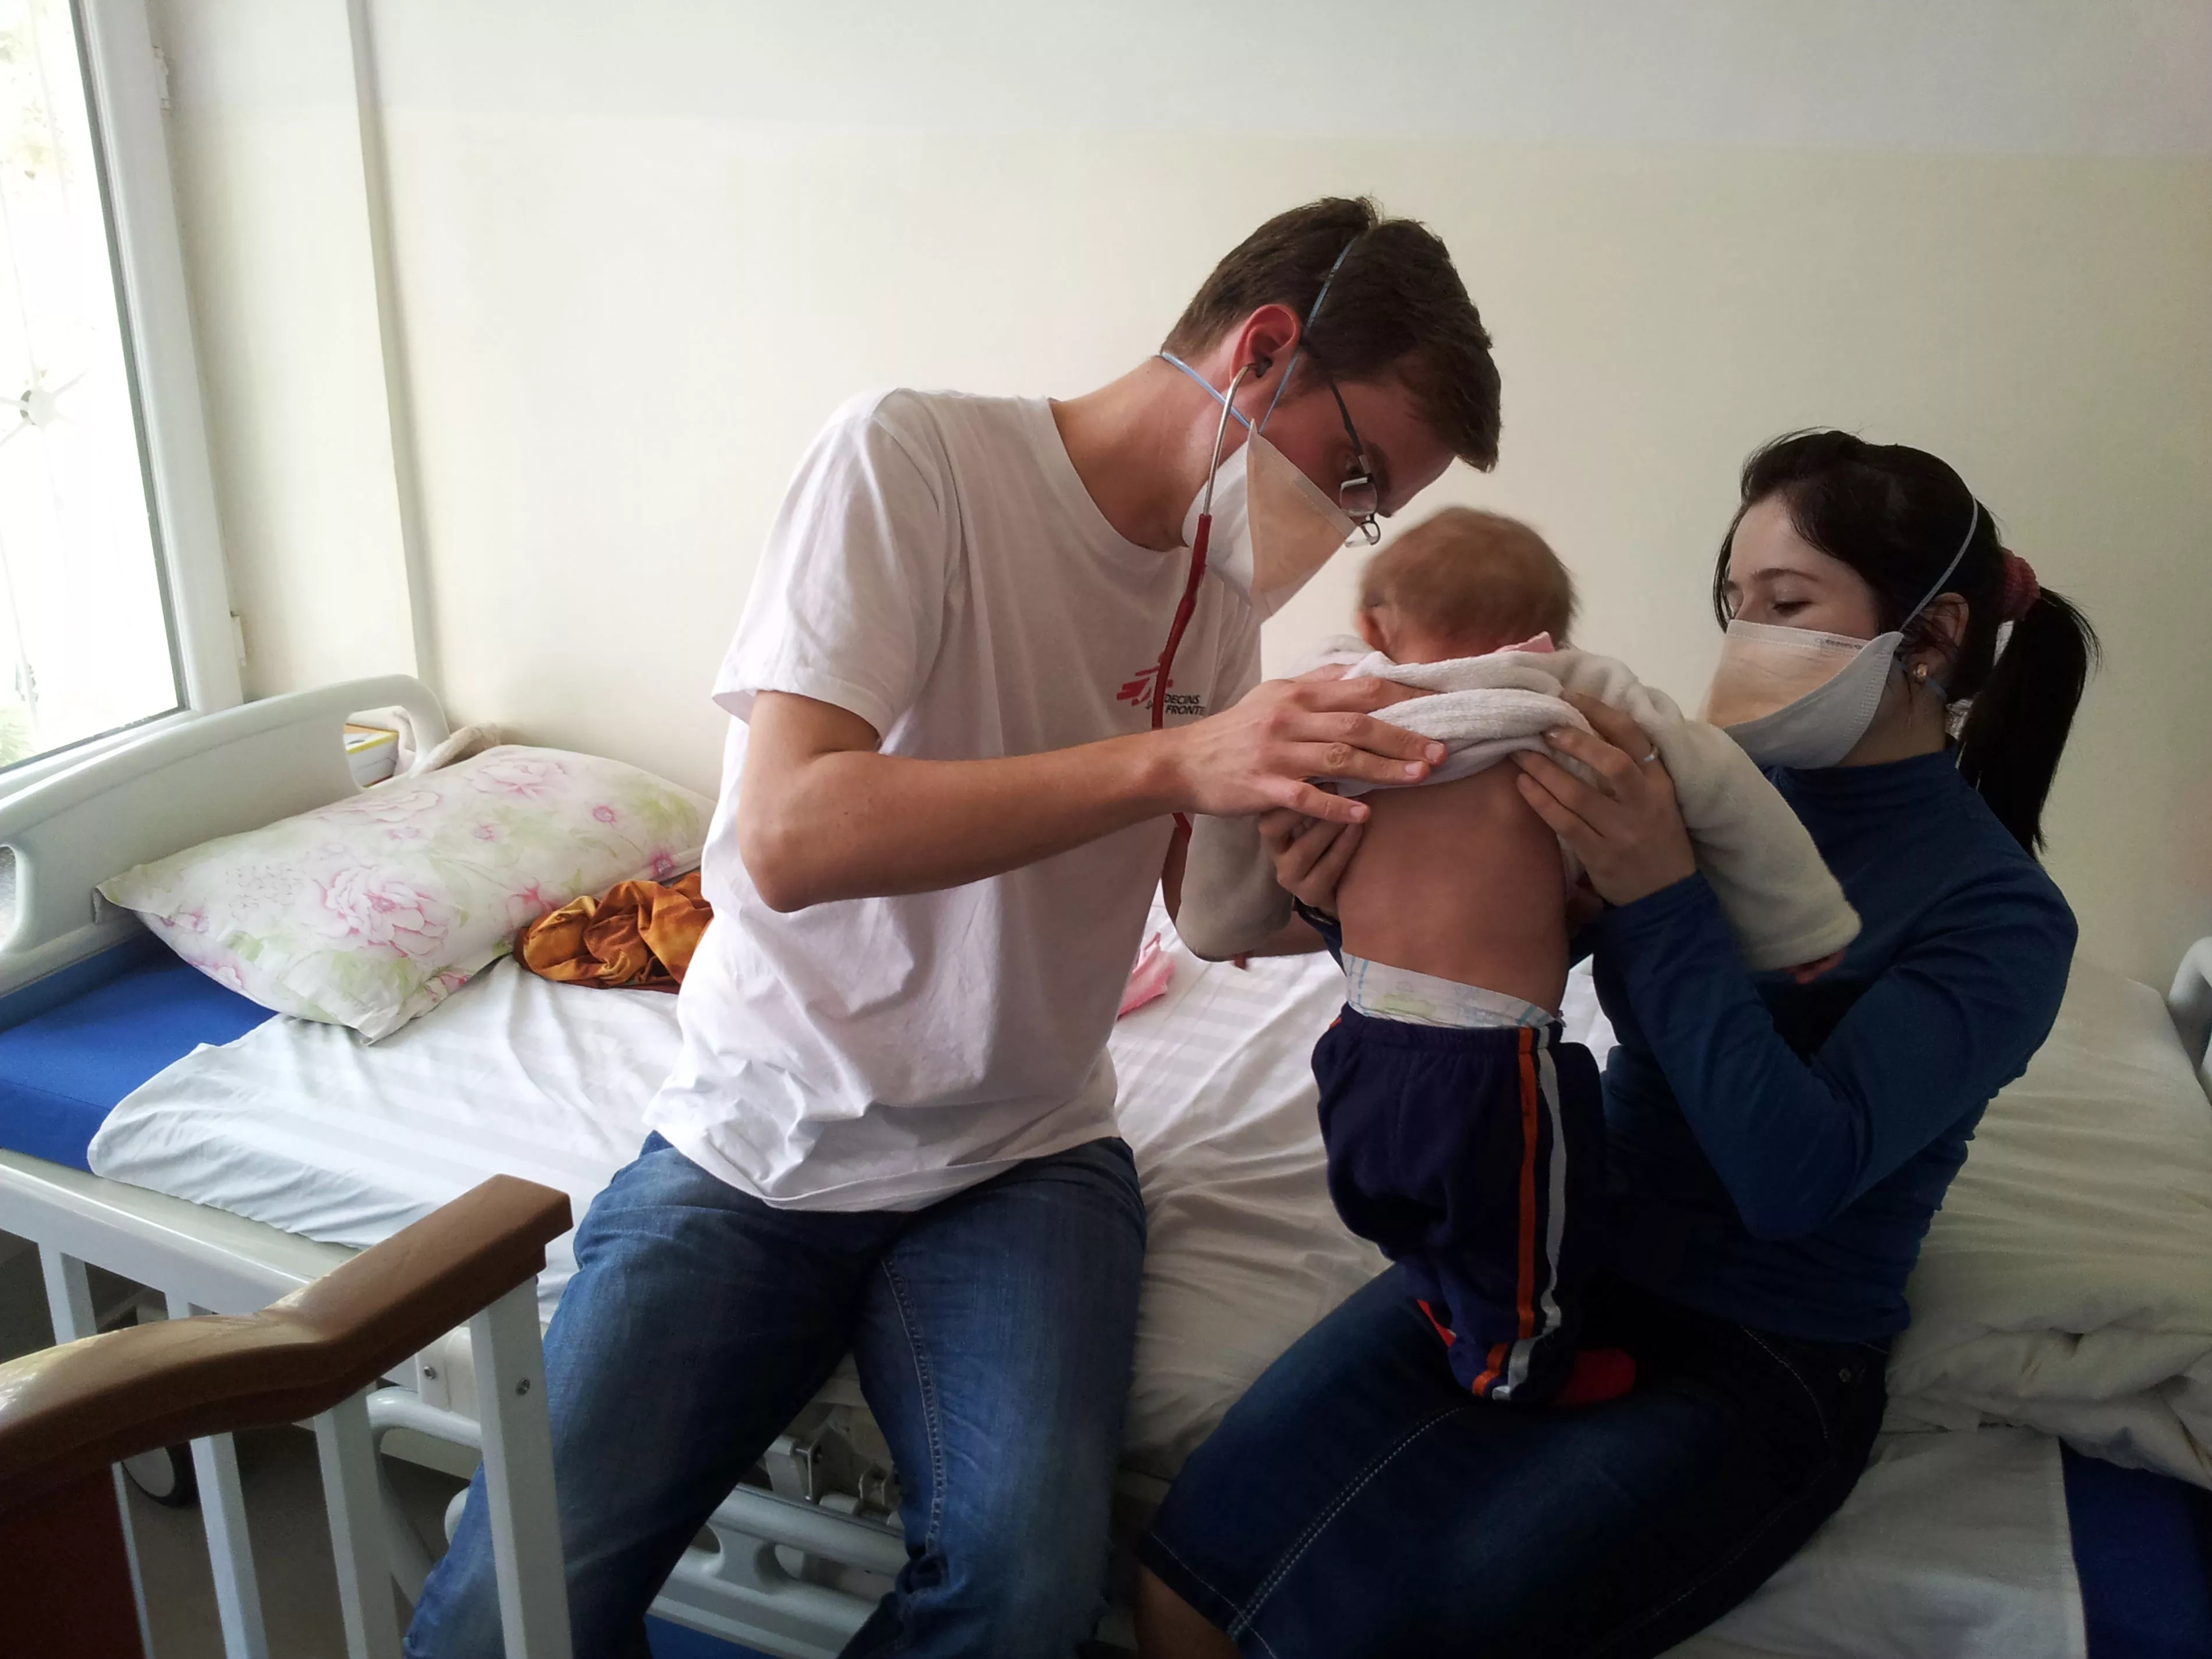 MSF Dr. Christoph Hoehn and nurse Gulru Nobodieva examine a nine-month old baby in Dushanbe, Tajikistan.